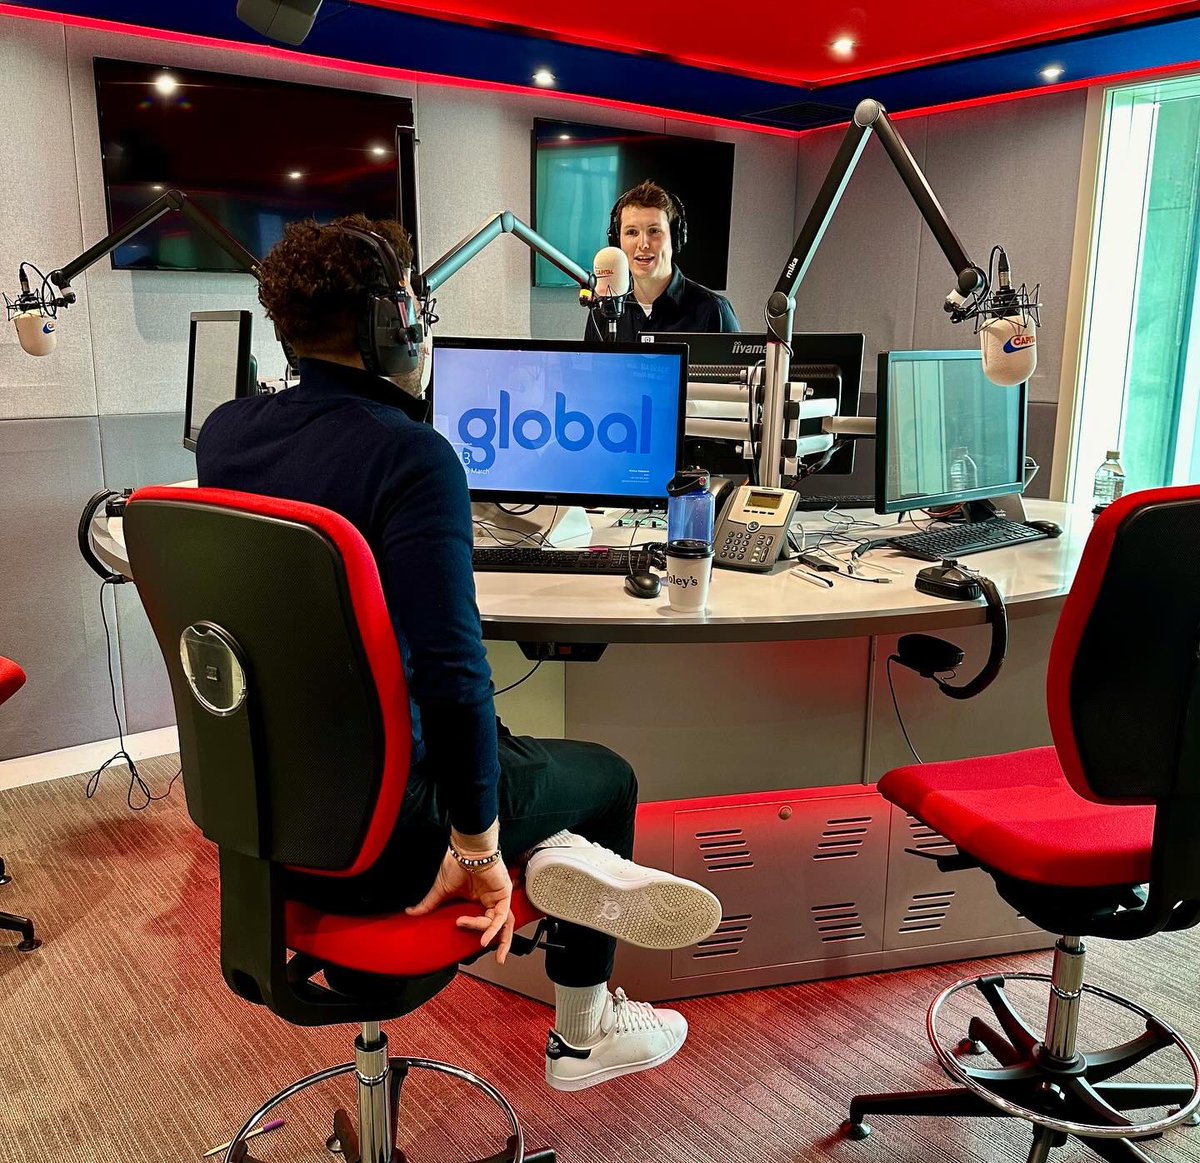 It’s nearly time, Monday morning the absolute legend that is @jordannorth1 starts the @CapitalOfficial Breakfast Show!! He’s put a big smile on my face & he’ll do the same for you with @Chris_Stark & @Sianwelby! AND … if you missed our chat catch up on @GlobalPlayer now! 🥰